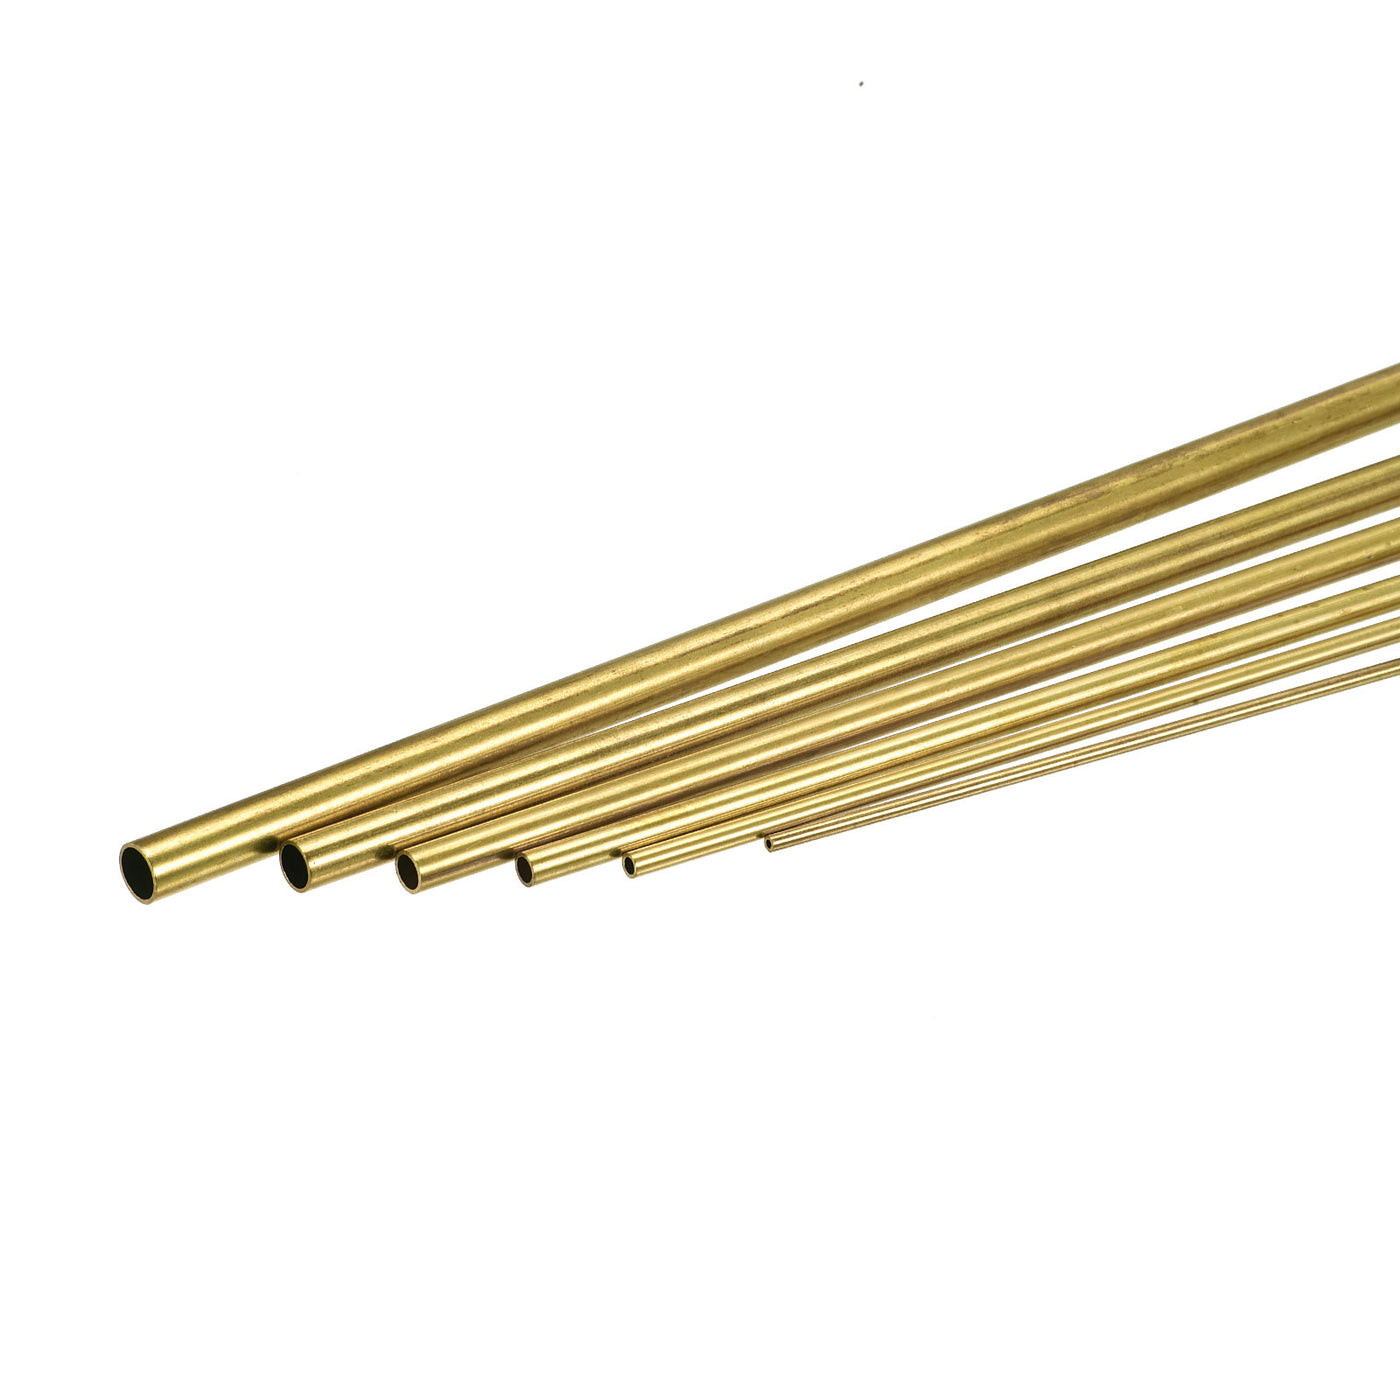 Uxcell Uxcell Brass Tube, 2mm 3mm 4mm 5mm 6mm 7mm OD x 0.5mm Wall Thickness 200mm Length Metal Tubing, Pack of 6